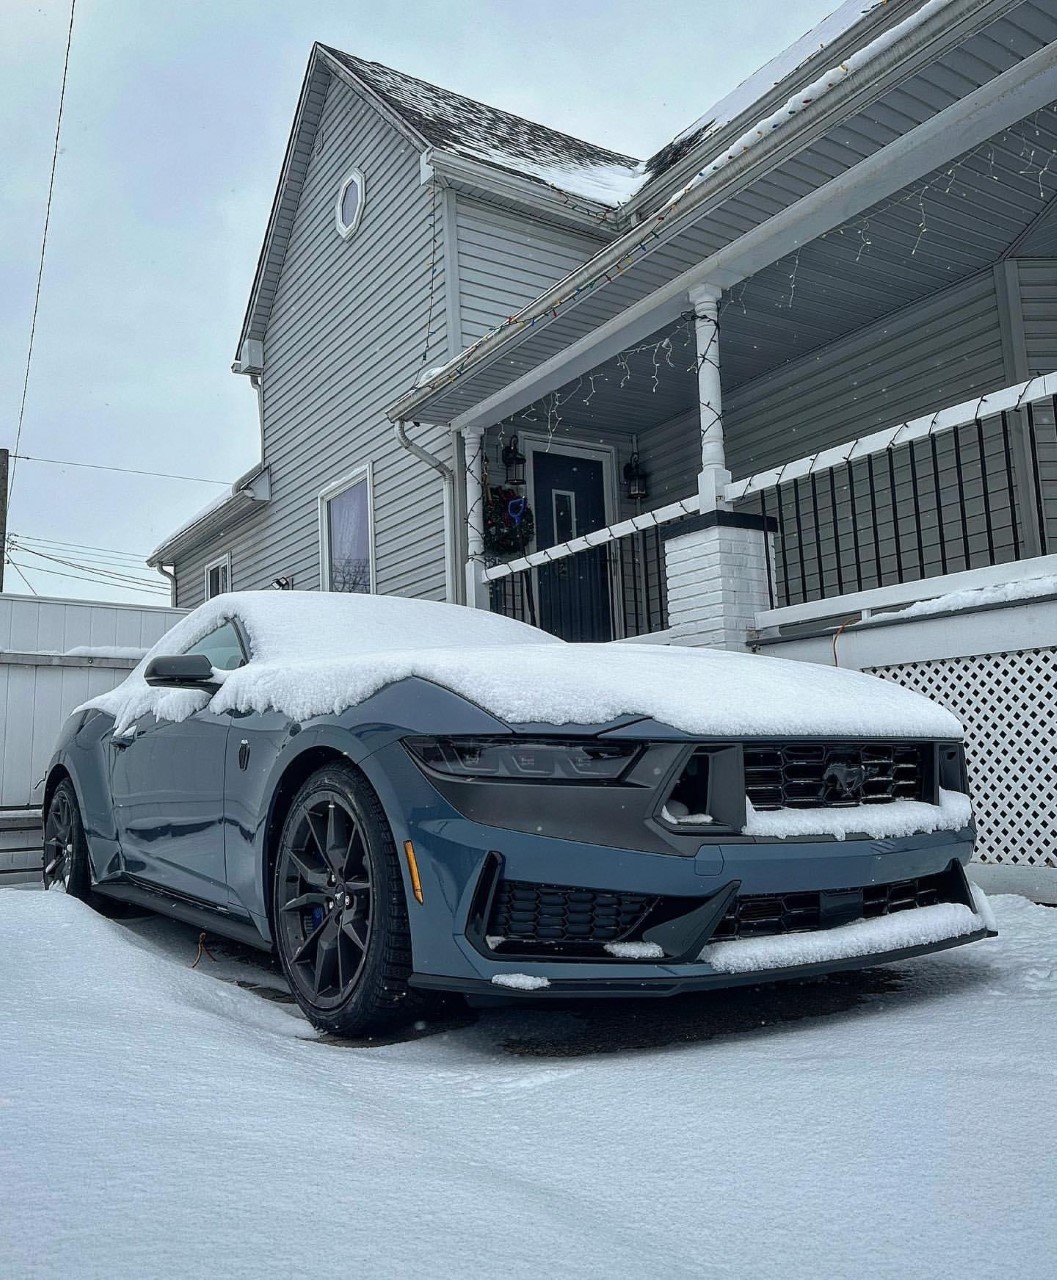 S650 Mustang Post all Mustang S650 pictures! S650 snow